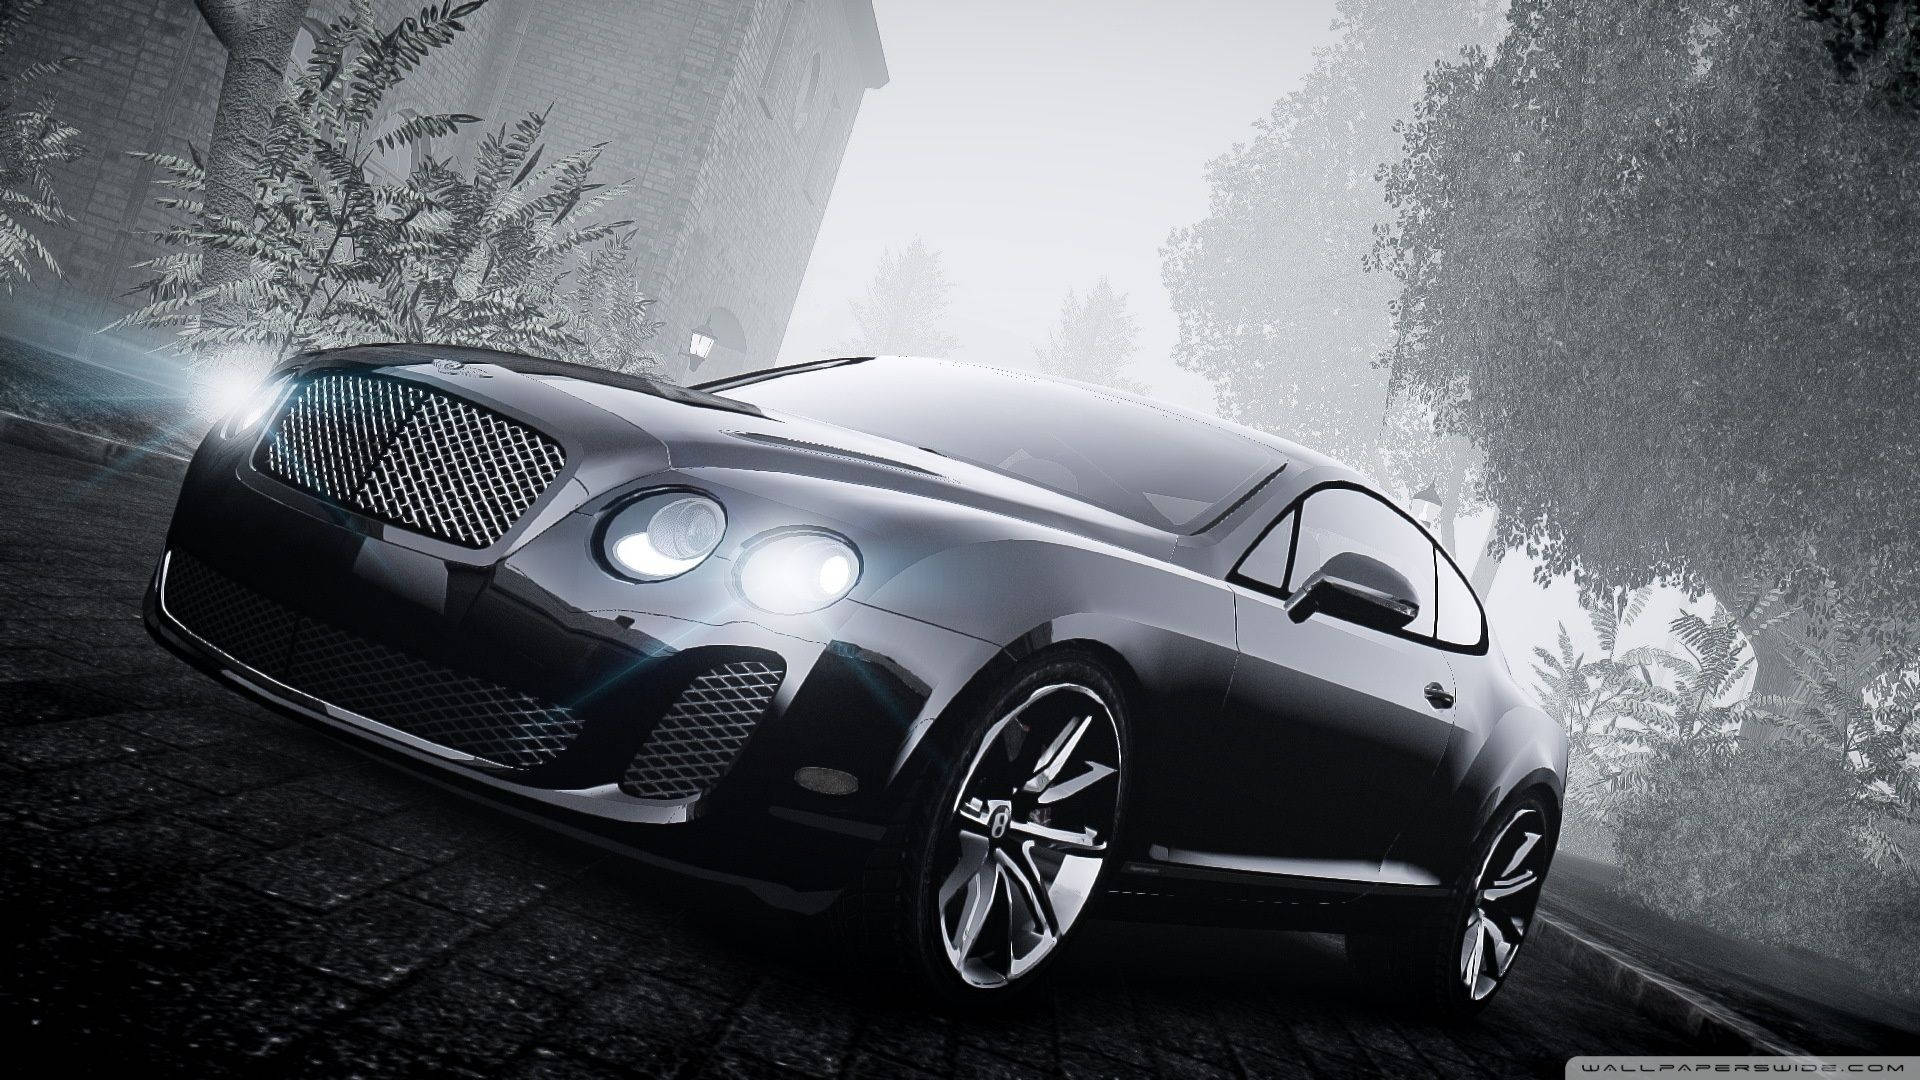 Road Trip Ready - Cruise the Streets in Bentley Wallpaper